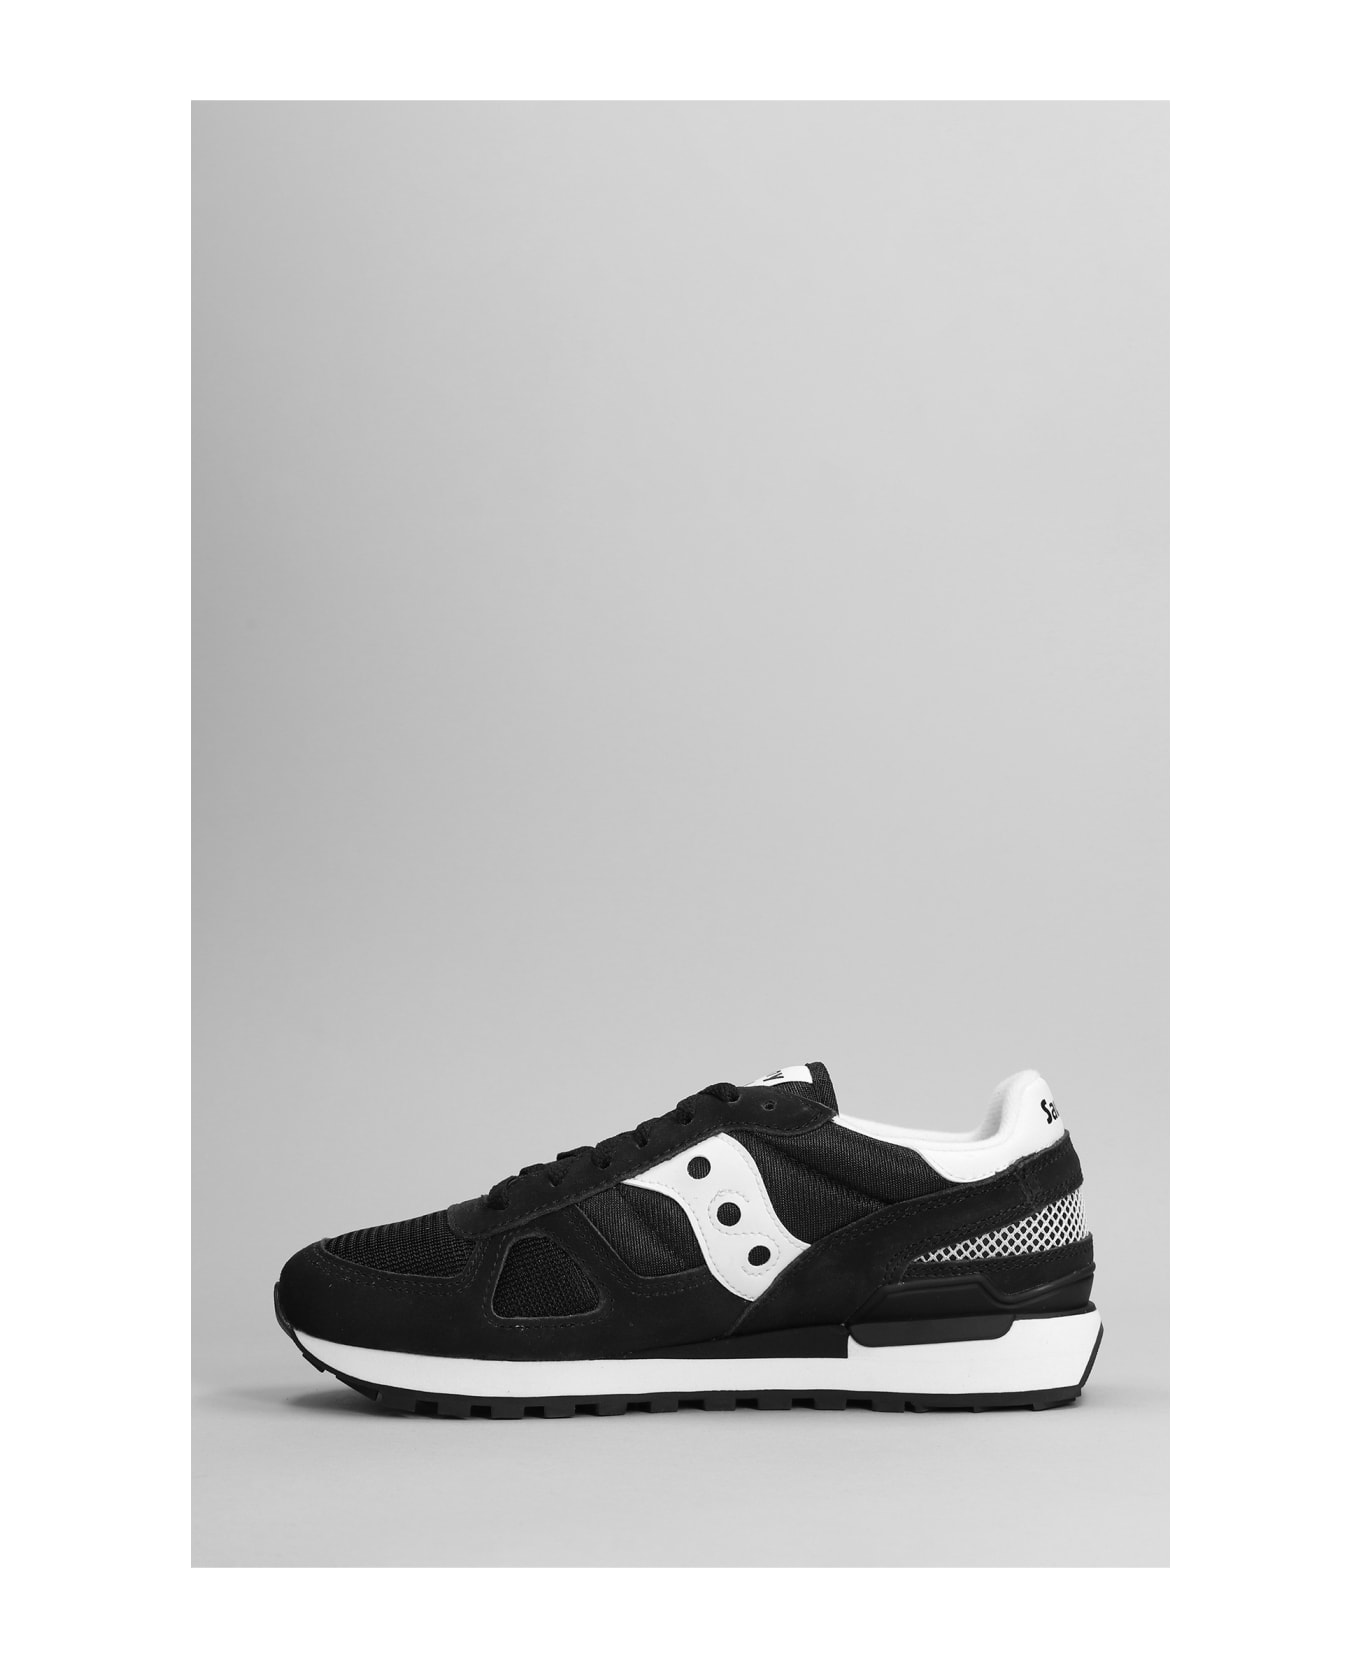 Saucony Shadow Original Sneakers In Black Suede And Fabric - Black Boston